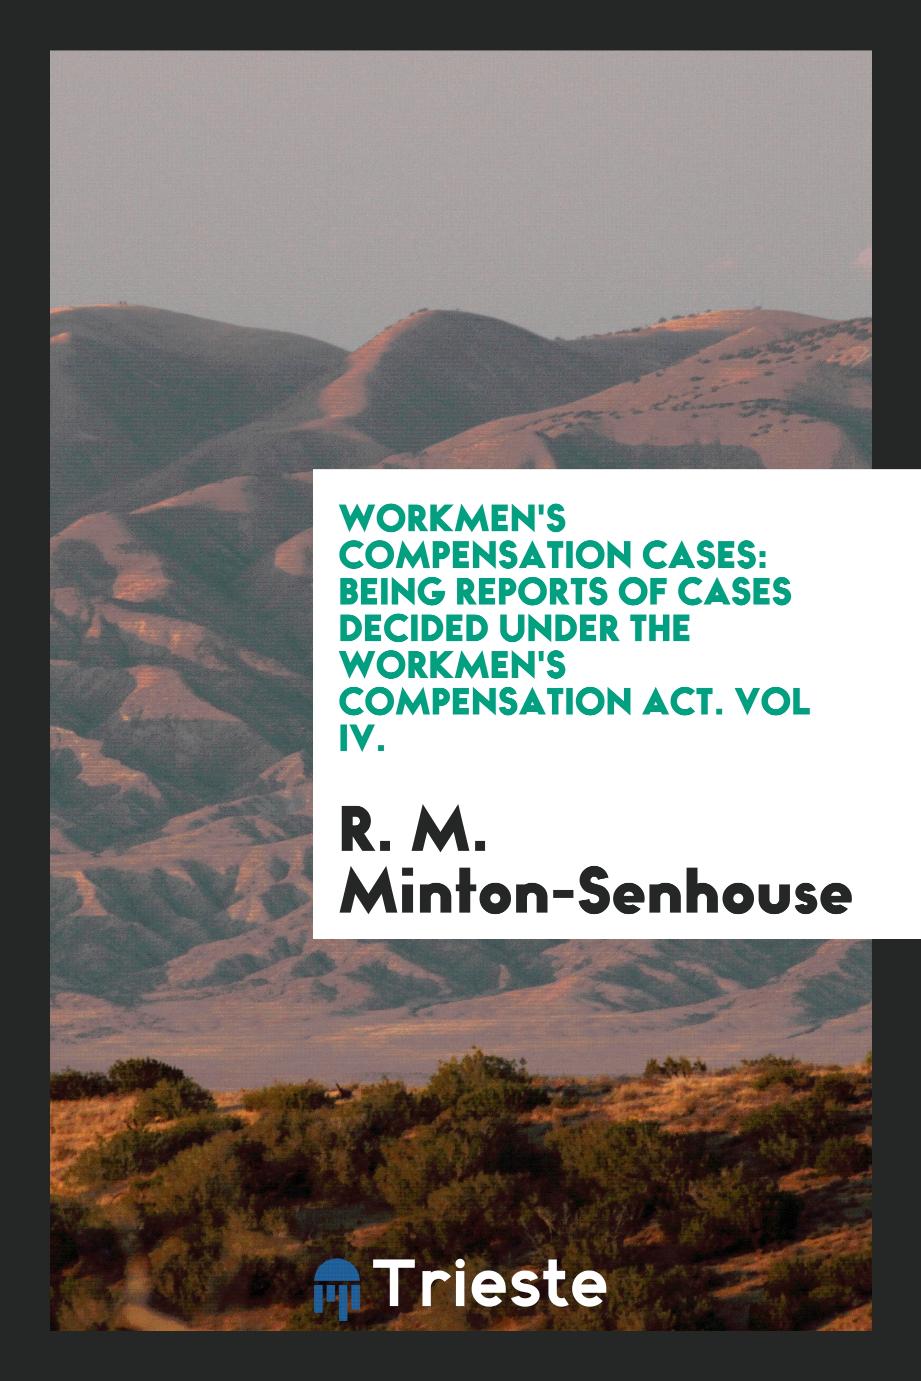 Workmen's Compensation Cases: Being Reports of Cases Decided Under the Workmen's Compensation Act. Vol IV.